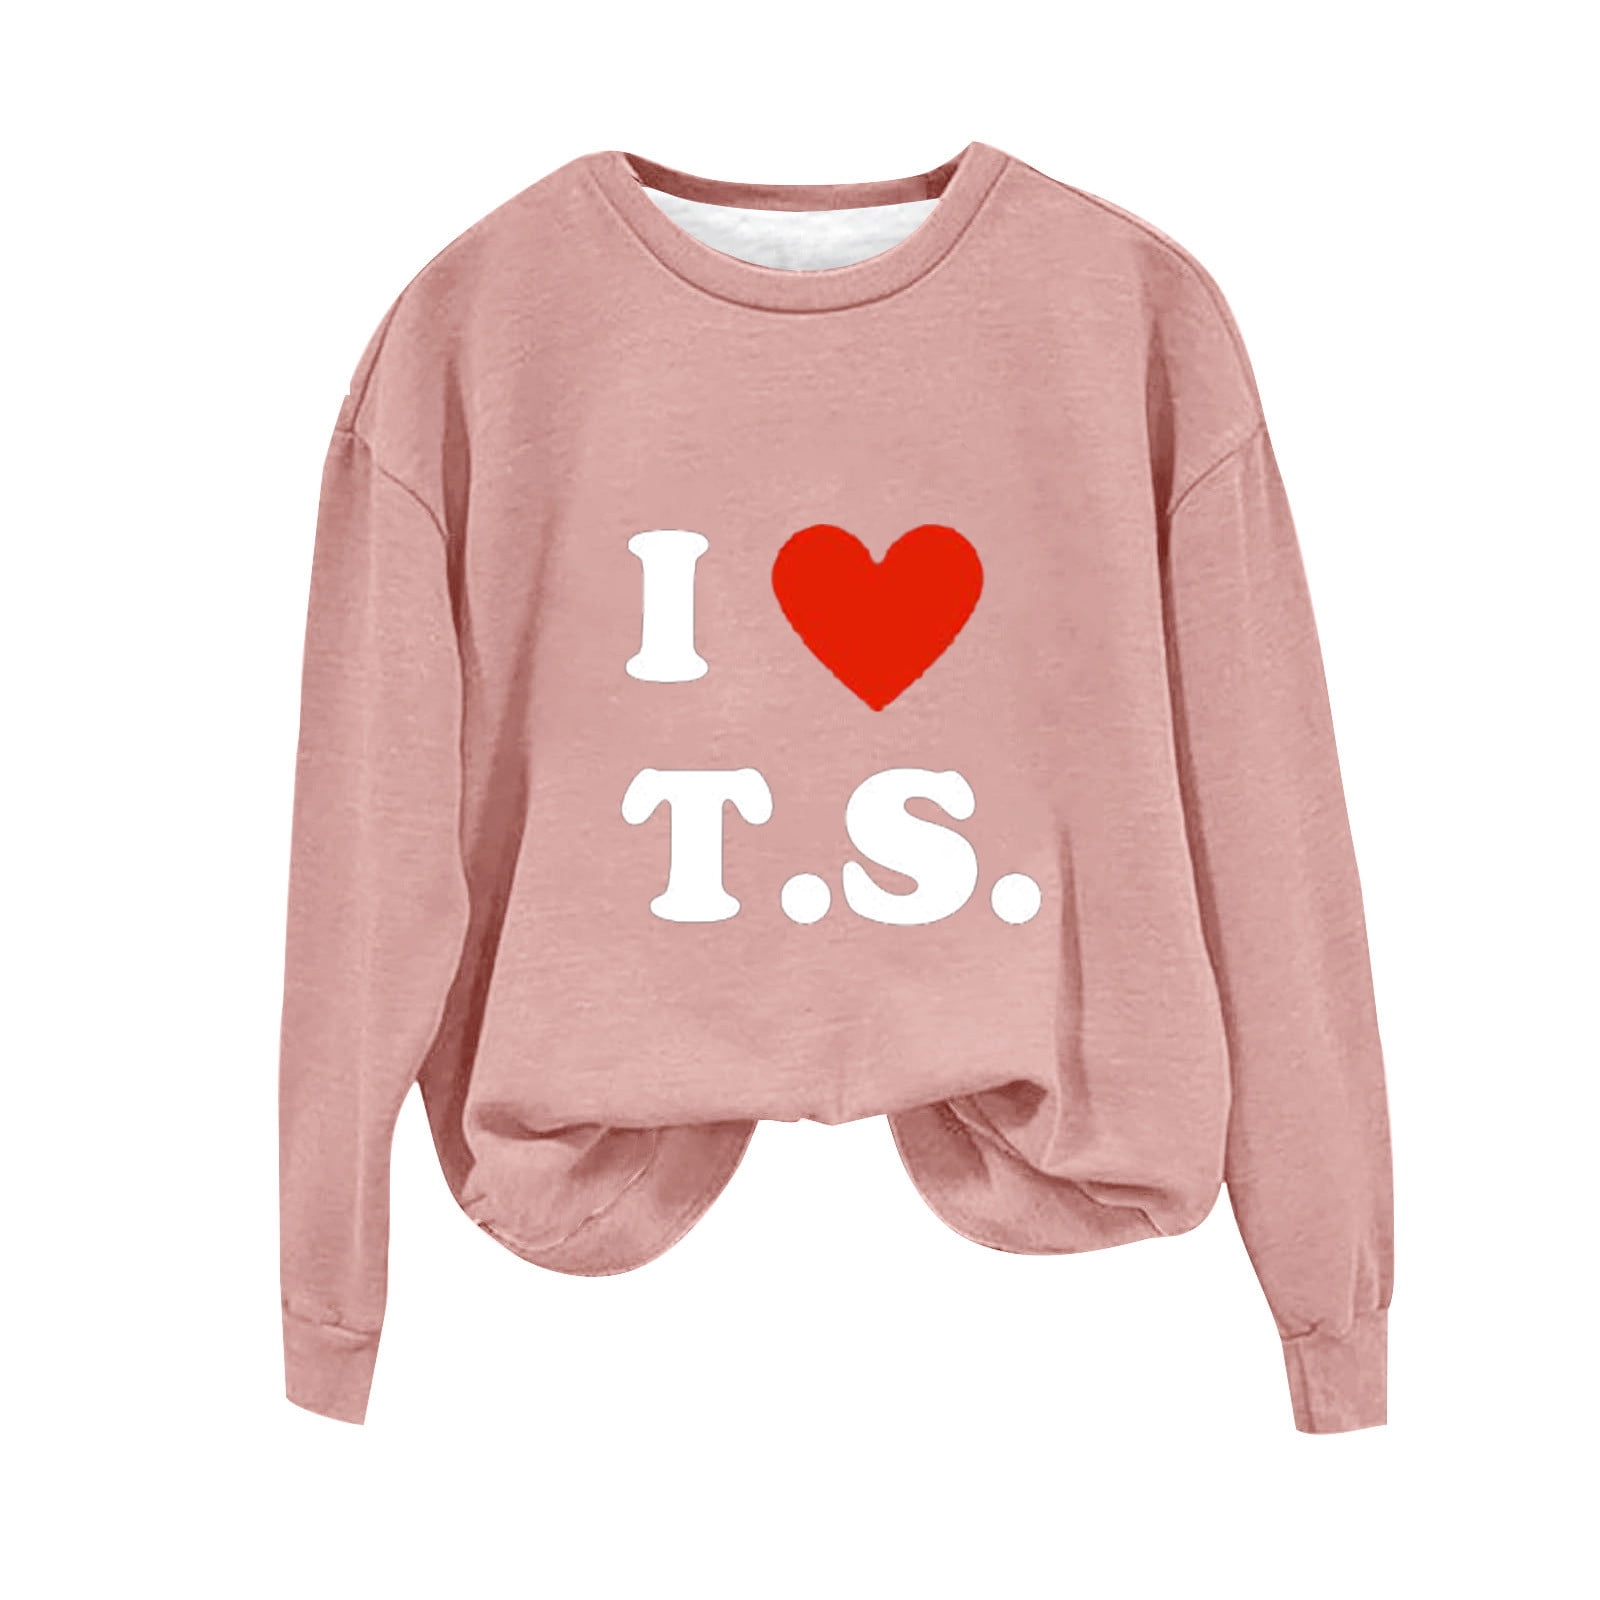 Valentine's Day Fashion Crew Neck Sweatshirts for Women Cute Heart Graphic  Print Pullover Tunic Tops Long Sleeve(Beige,M) 